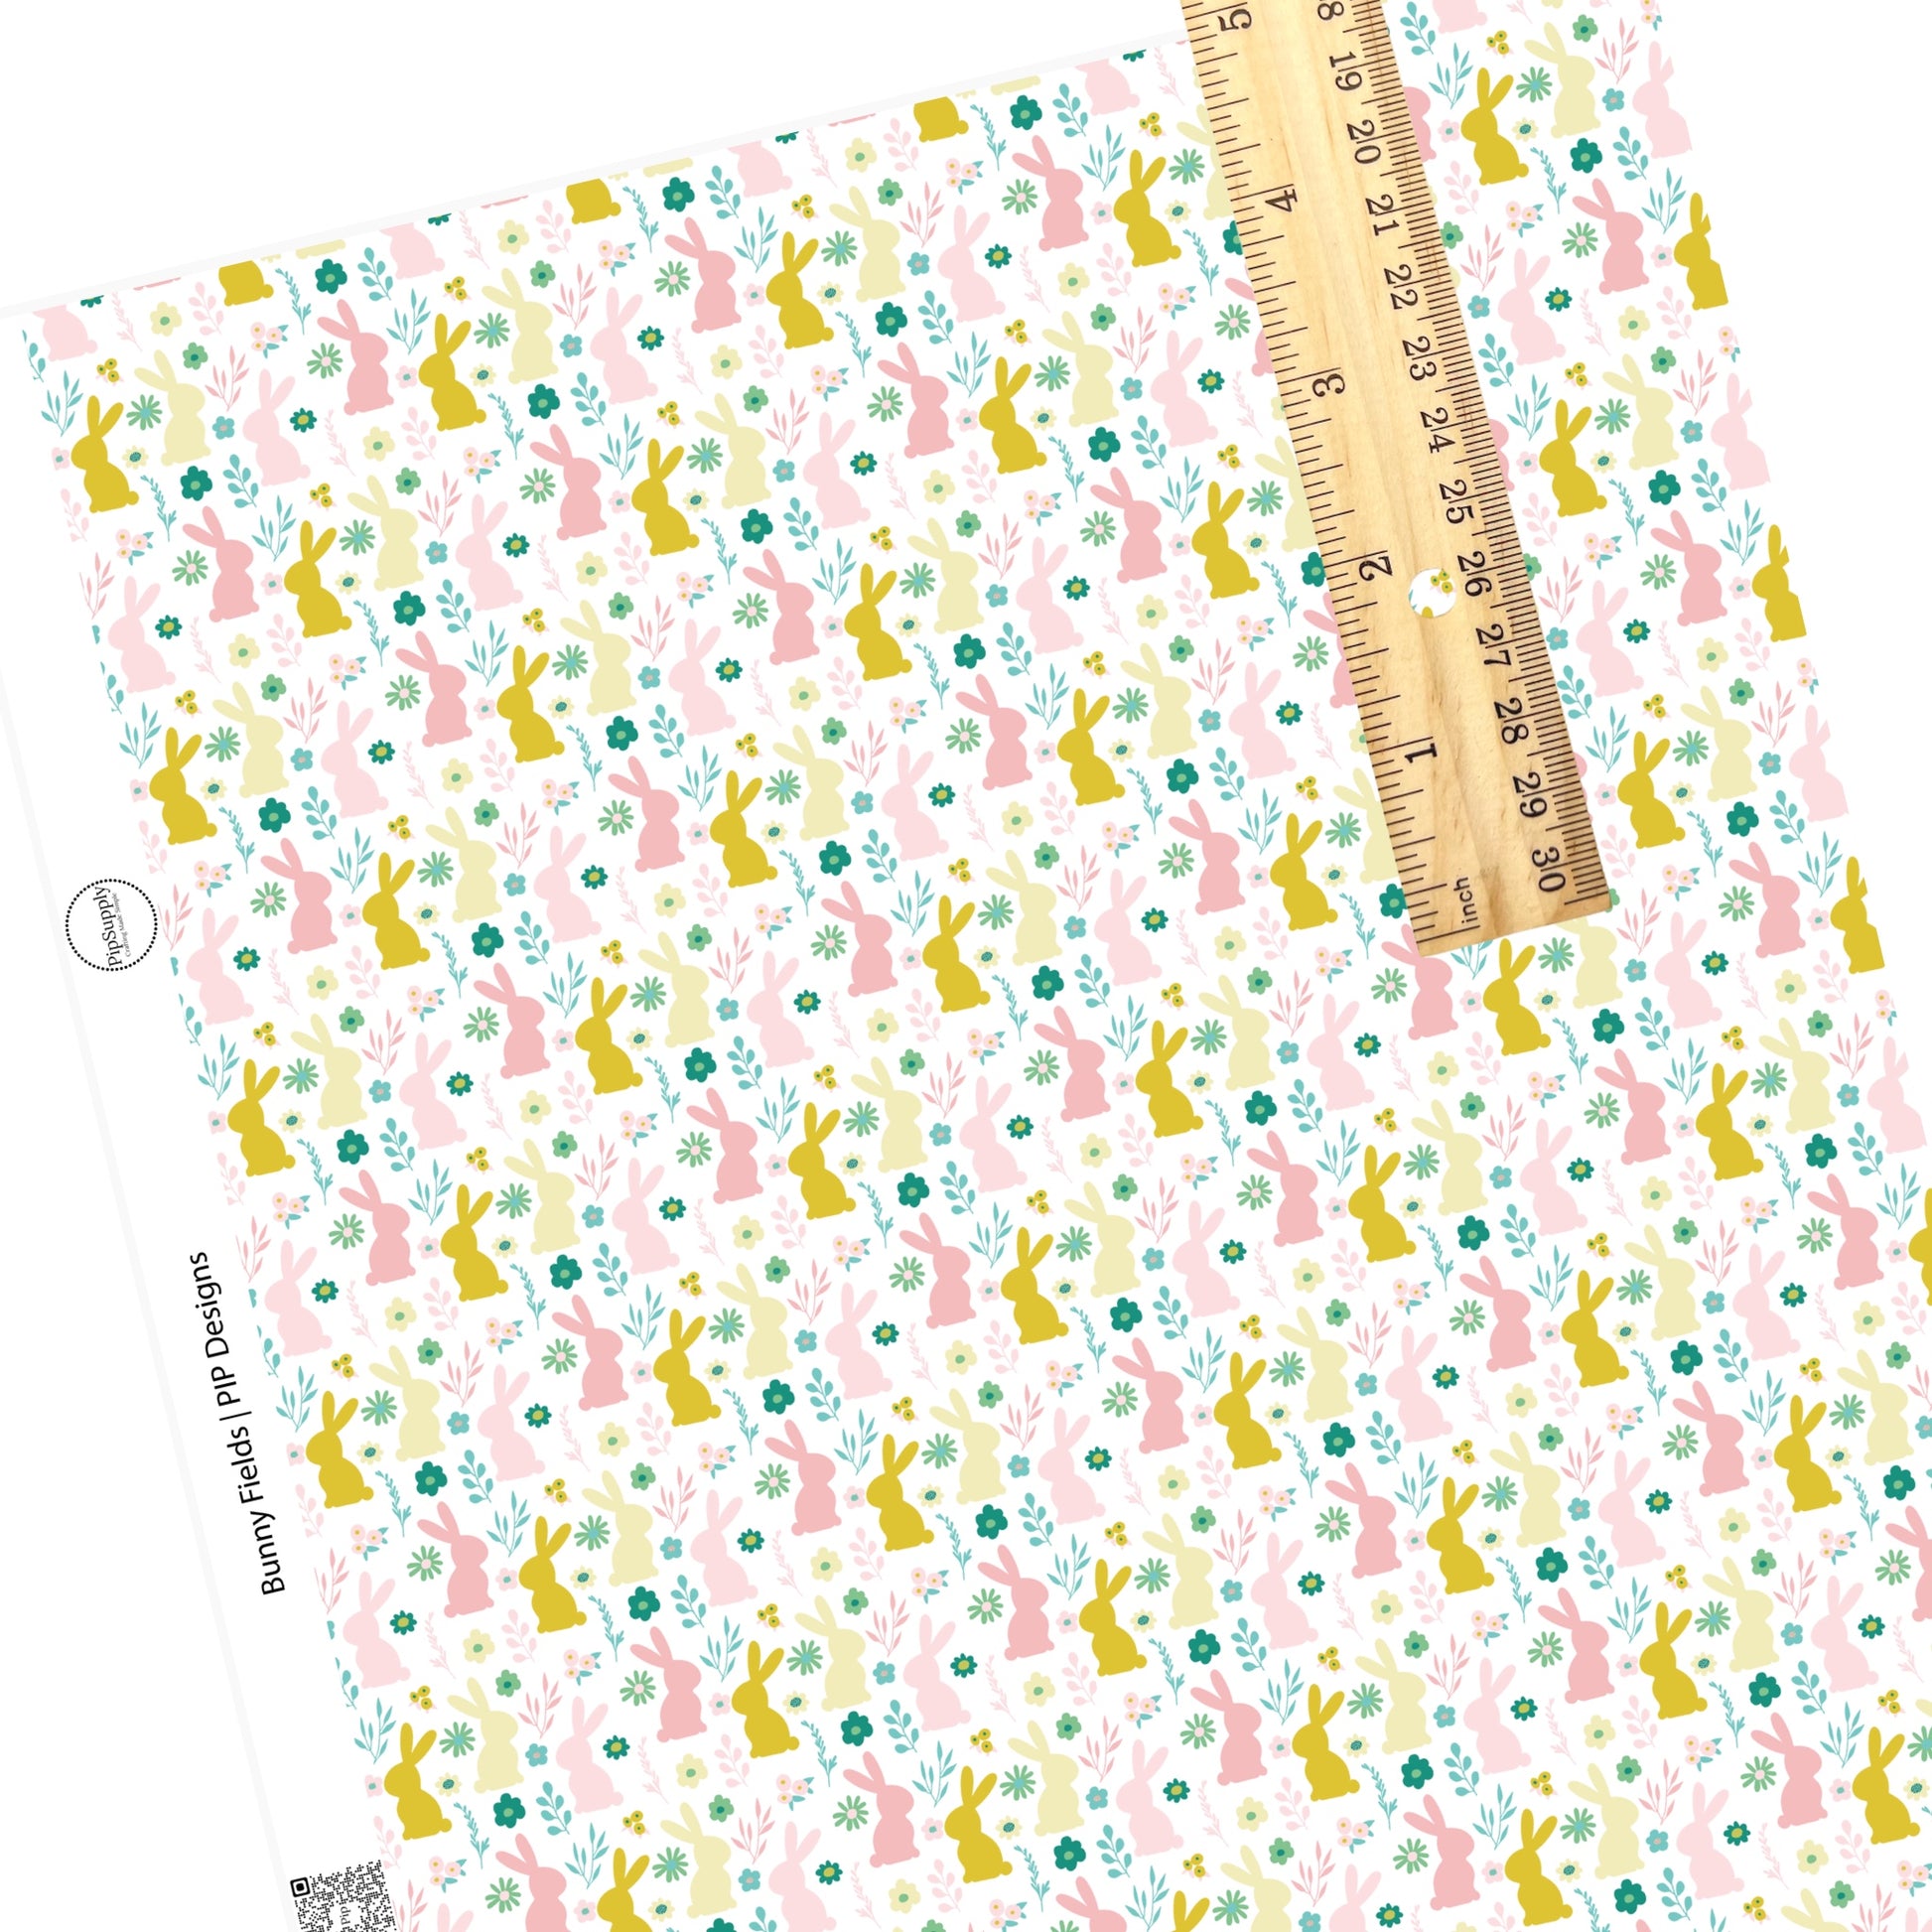 Pink, yelow, and green weeds and flowers with big pink and yellow bunnies on white faux leather sheet